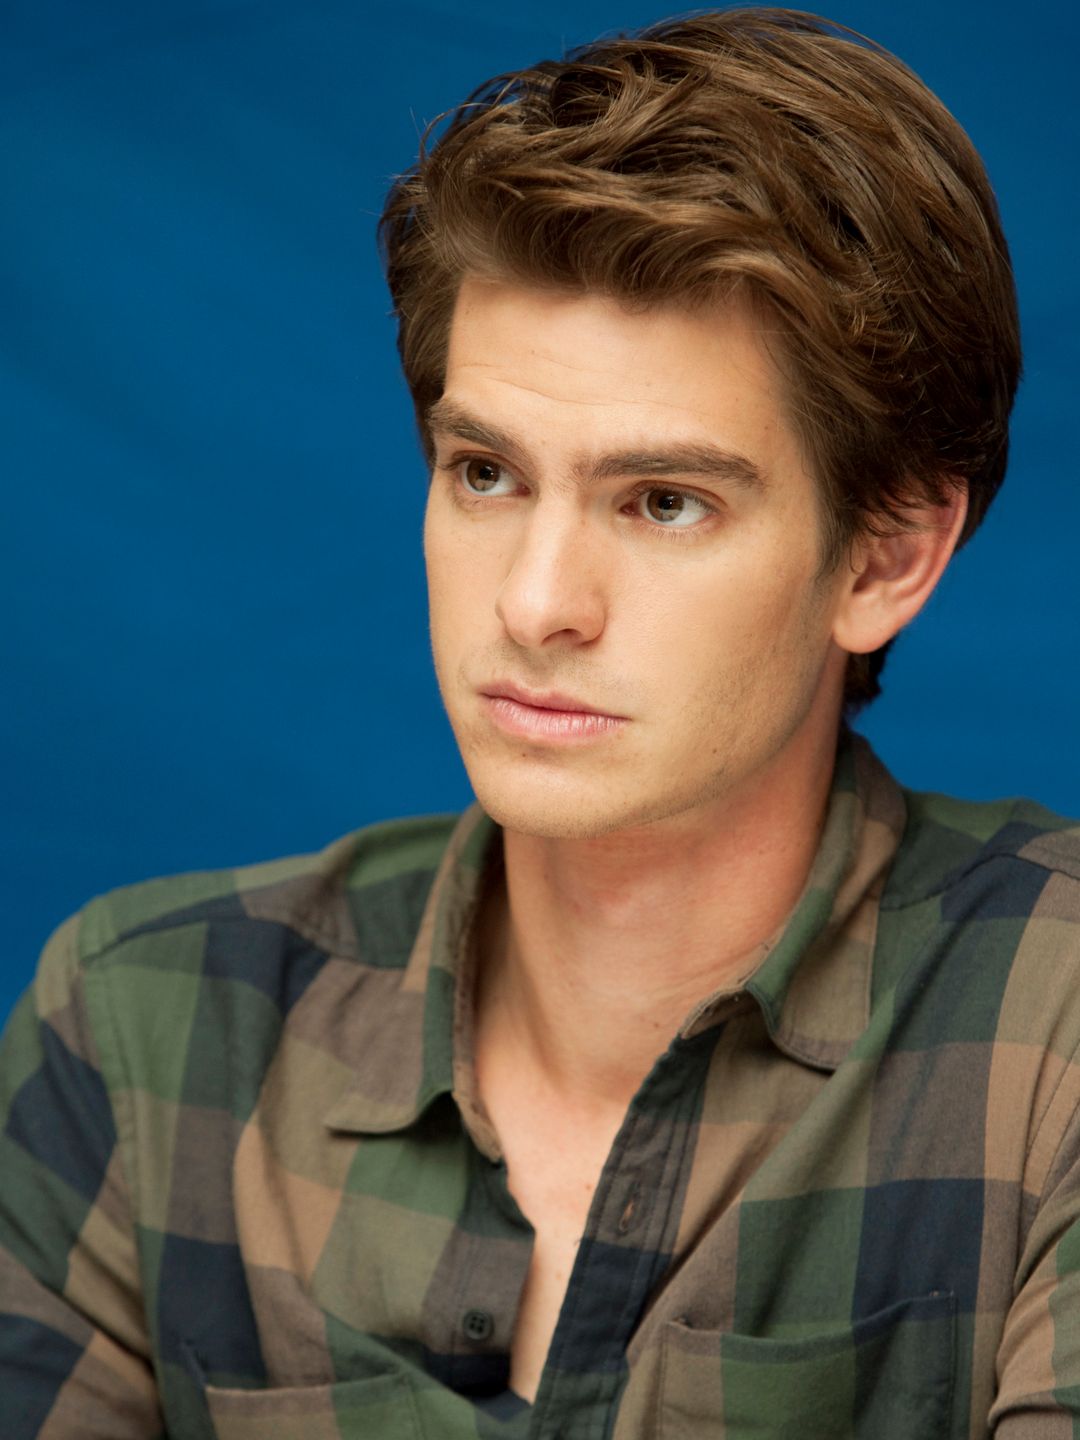 Andrew Garfield in real life